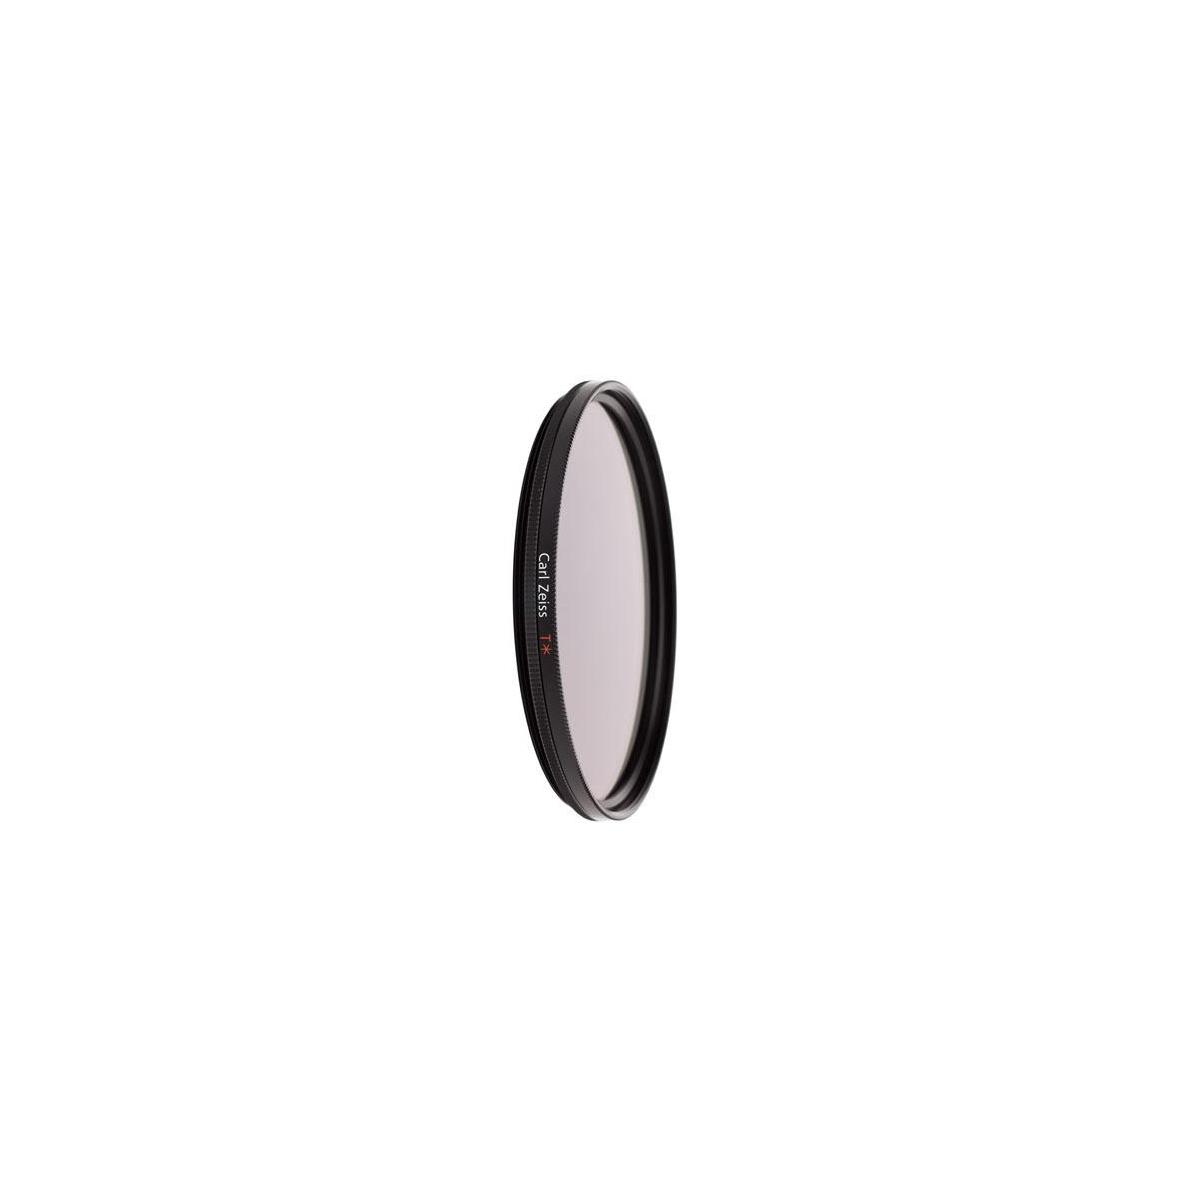 Zeiss 49mm T* Coated Circular Polarizing Filter